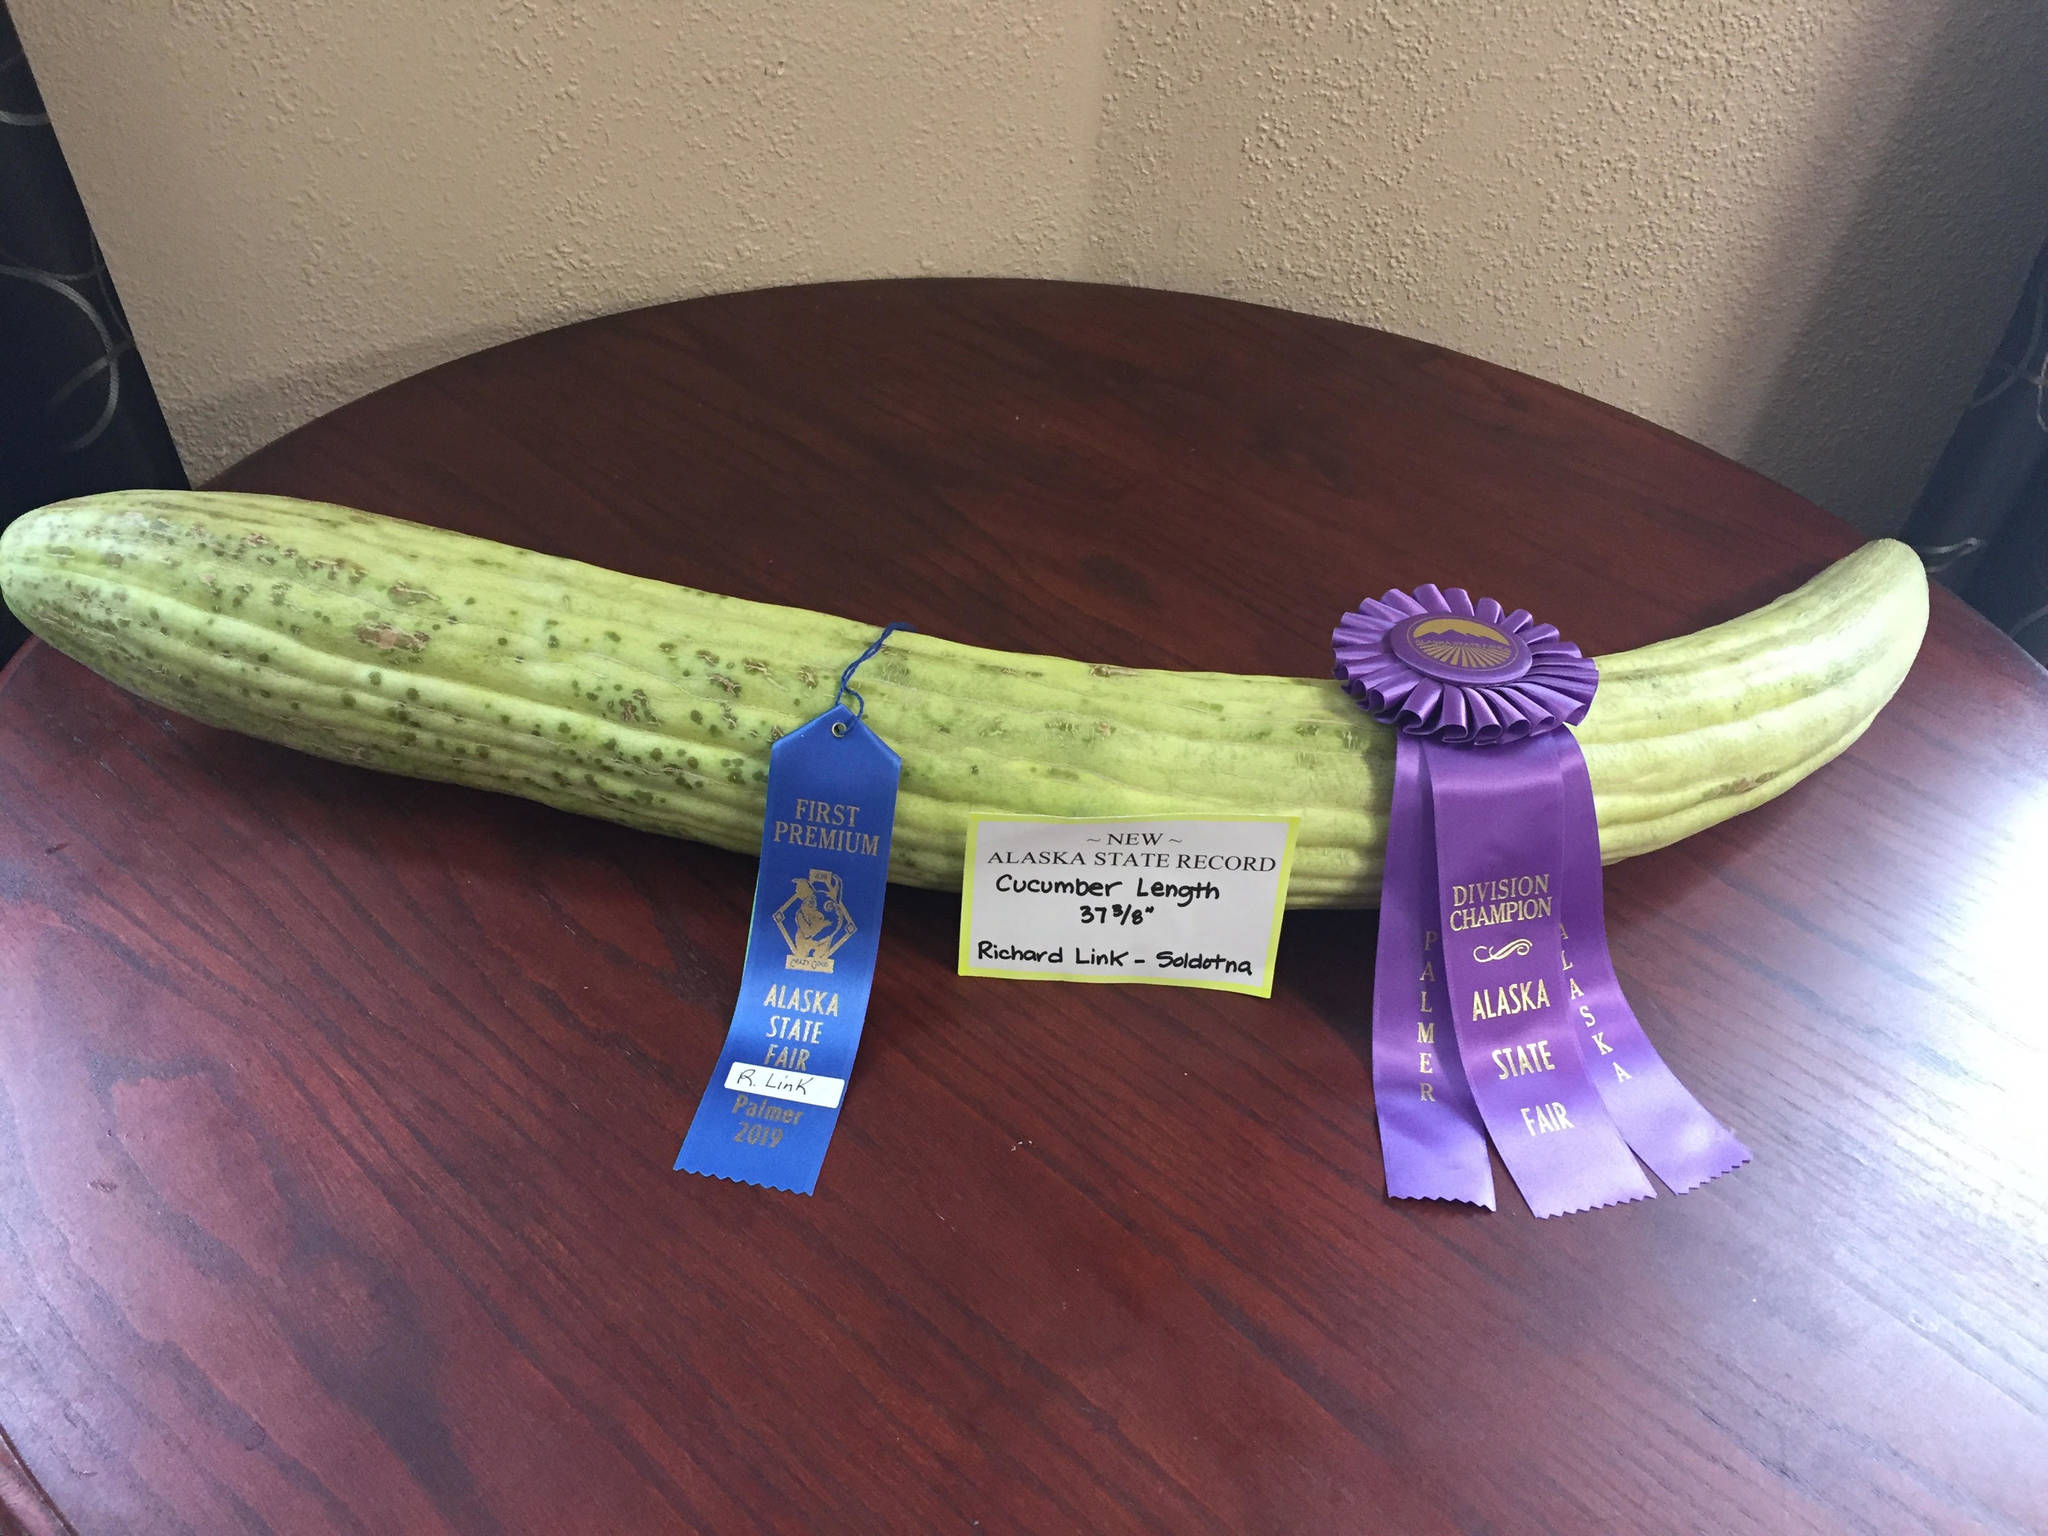 Richard Link’s prize-winning Armenian cucumber is seen with its ribbons in this August 2019 photo. (Courtesy Ludy Link)